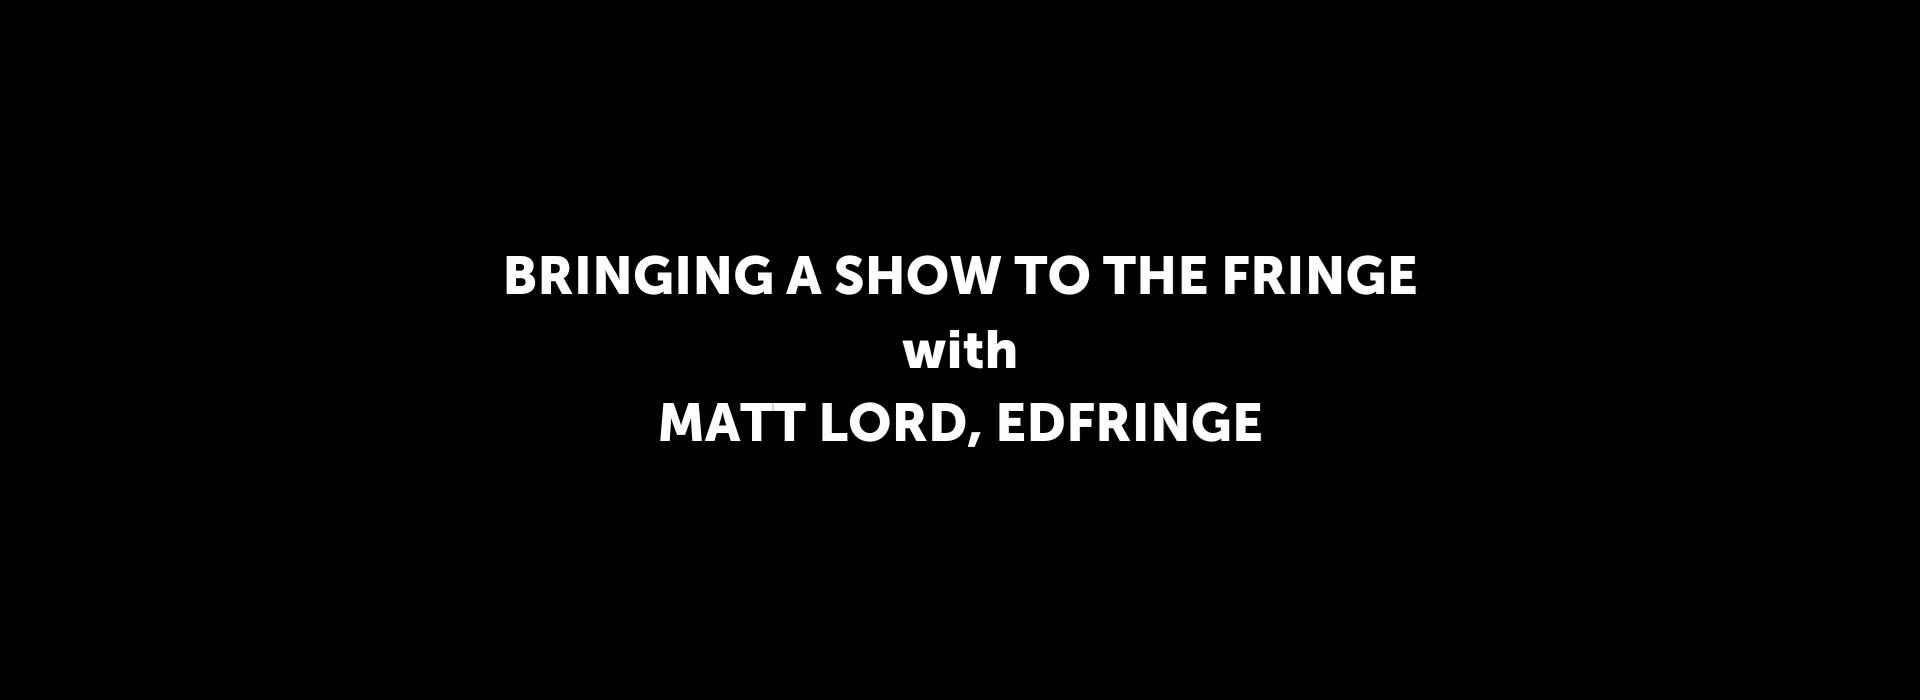 Bringing a show to the Fringe with Matt Lord